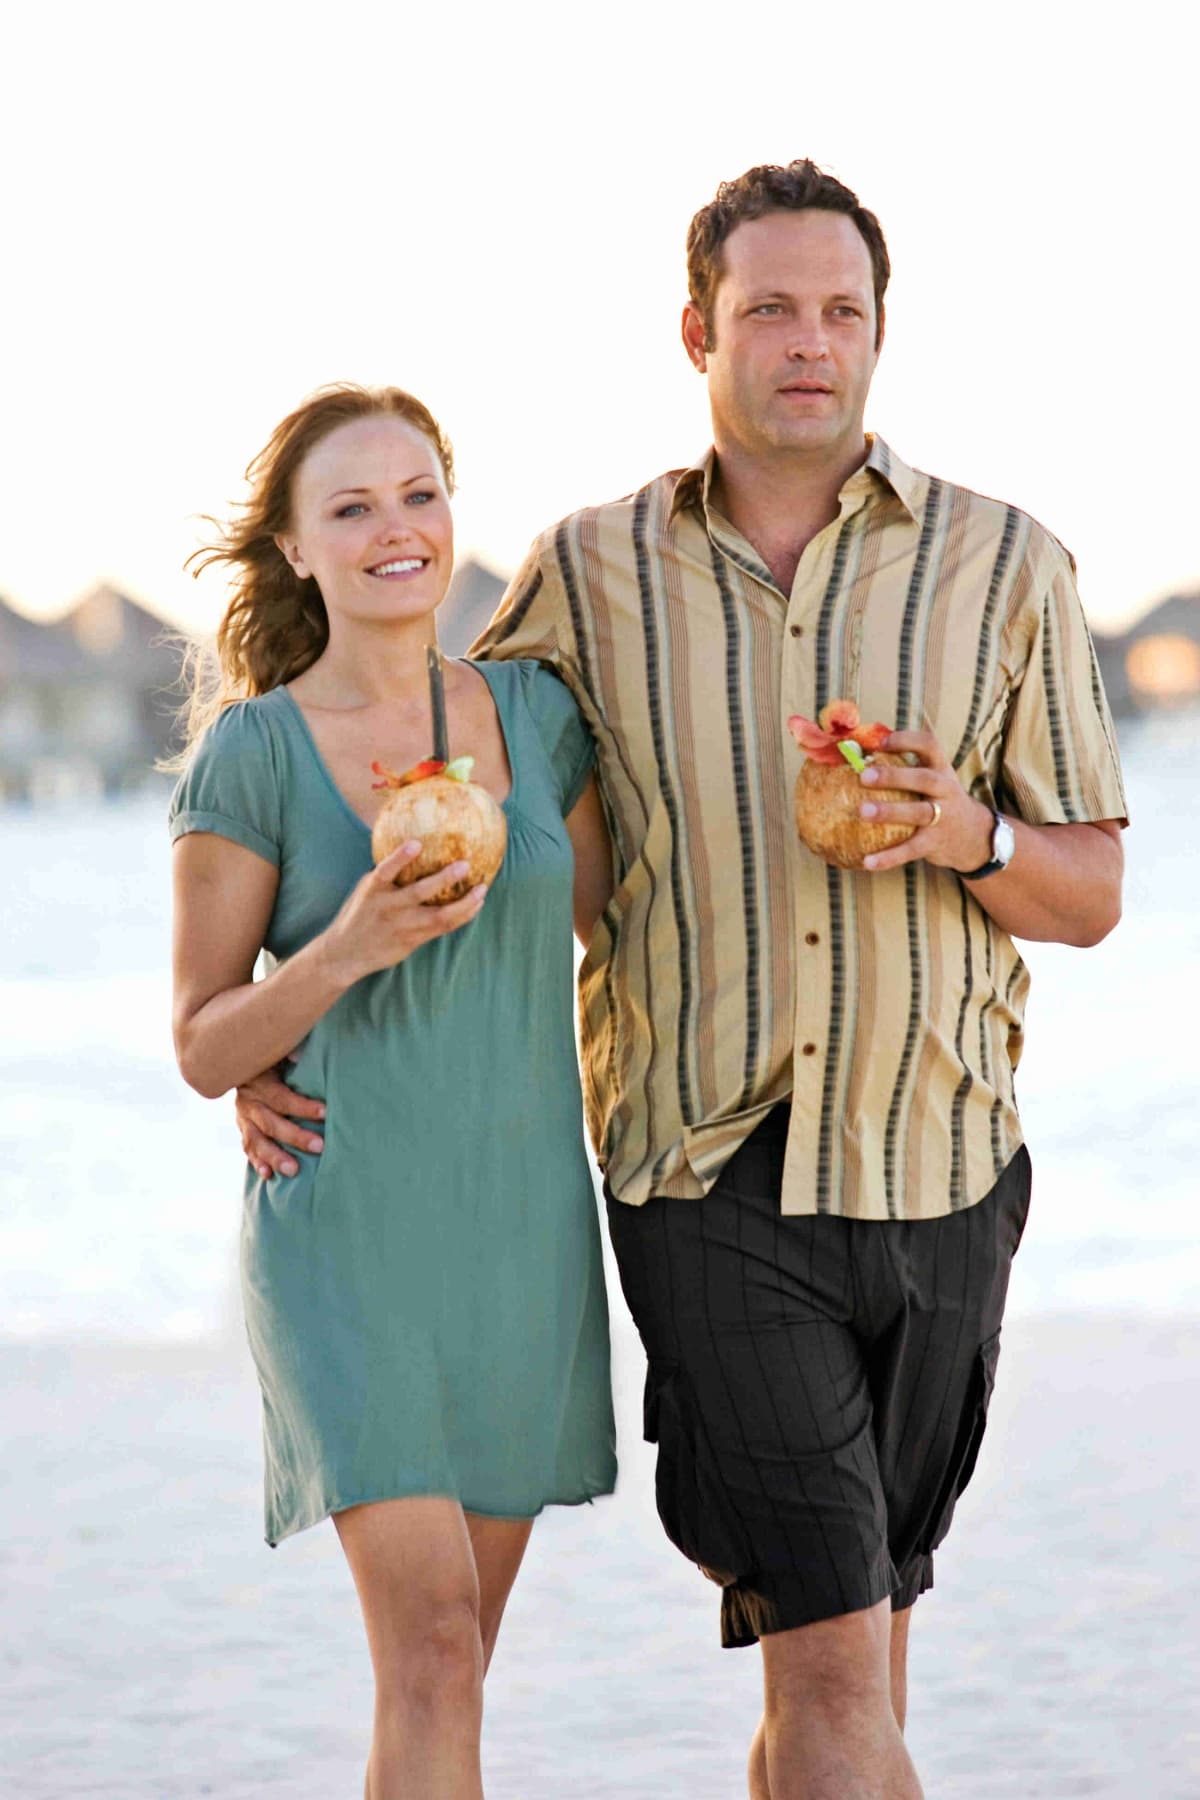 Malin Akerman as Ronnie and Vince Vaughn as Dave in the 2009 romantic comedy film Couples Retreat